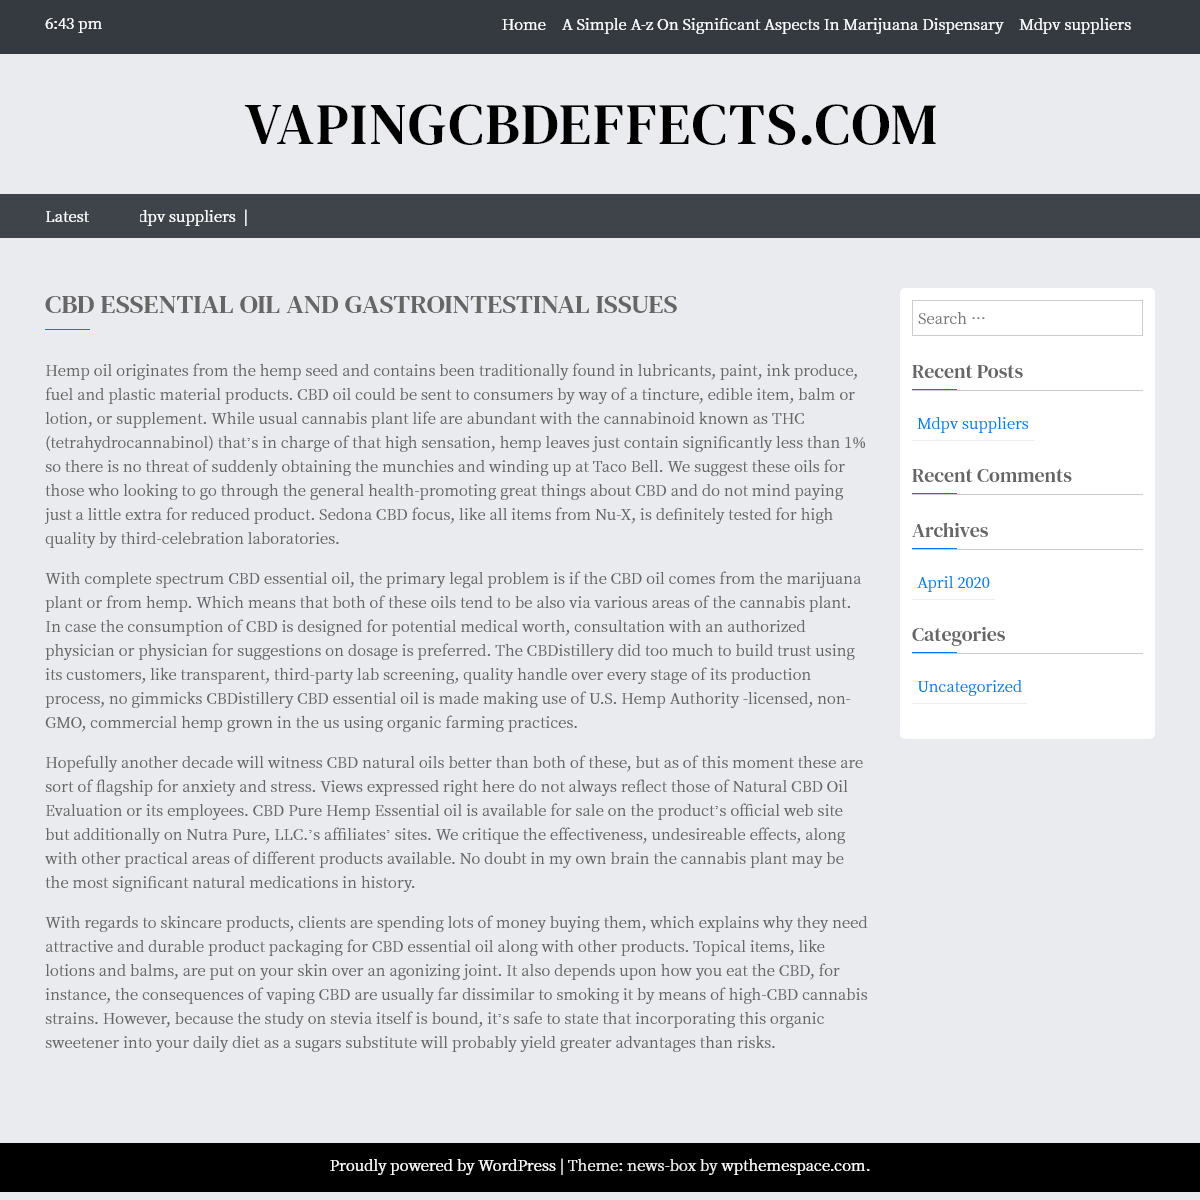 A complete backup of vapingcbdeffects.com